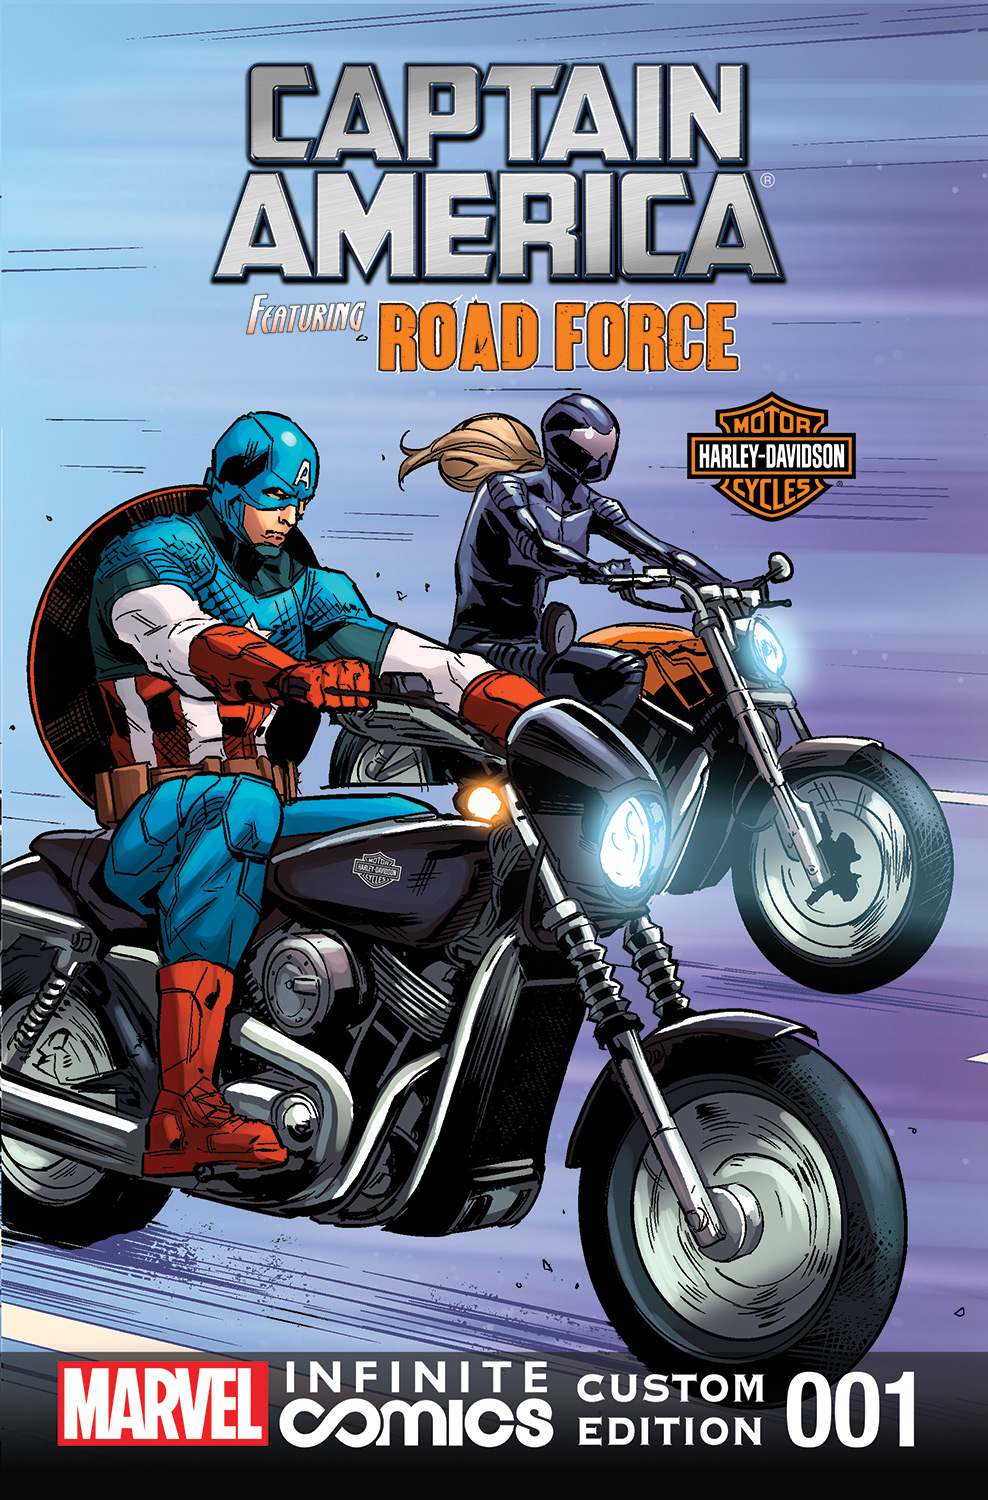 Captain America featuring Road Force in ENDGAME  (2015) #1